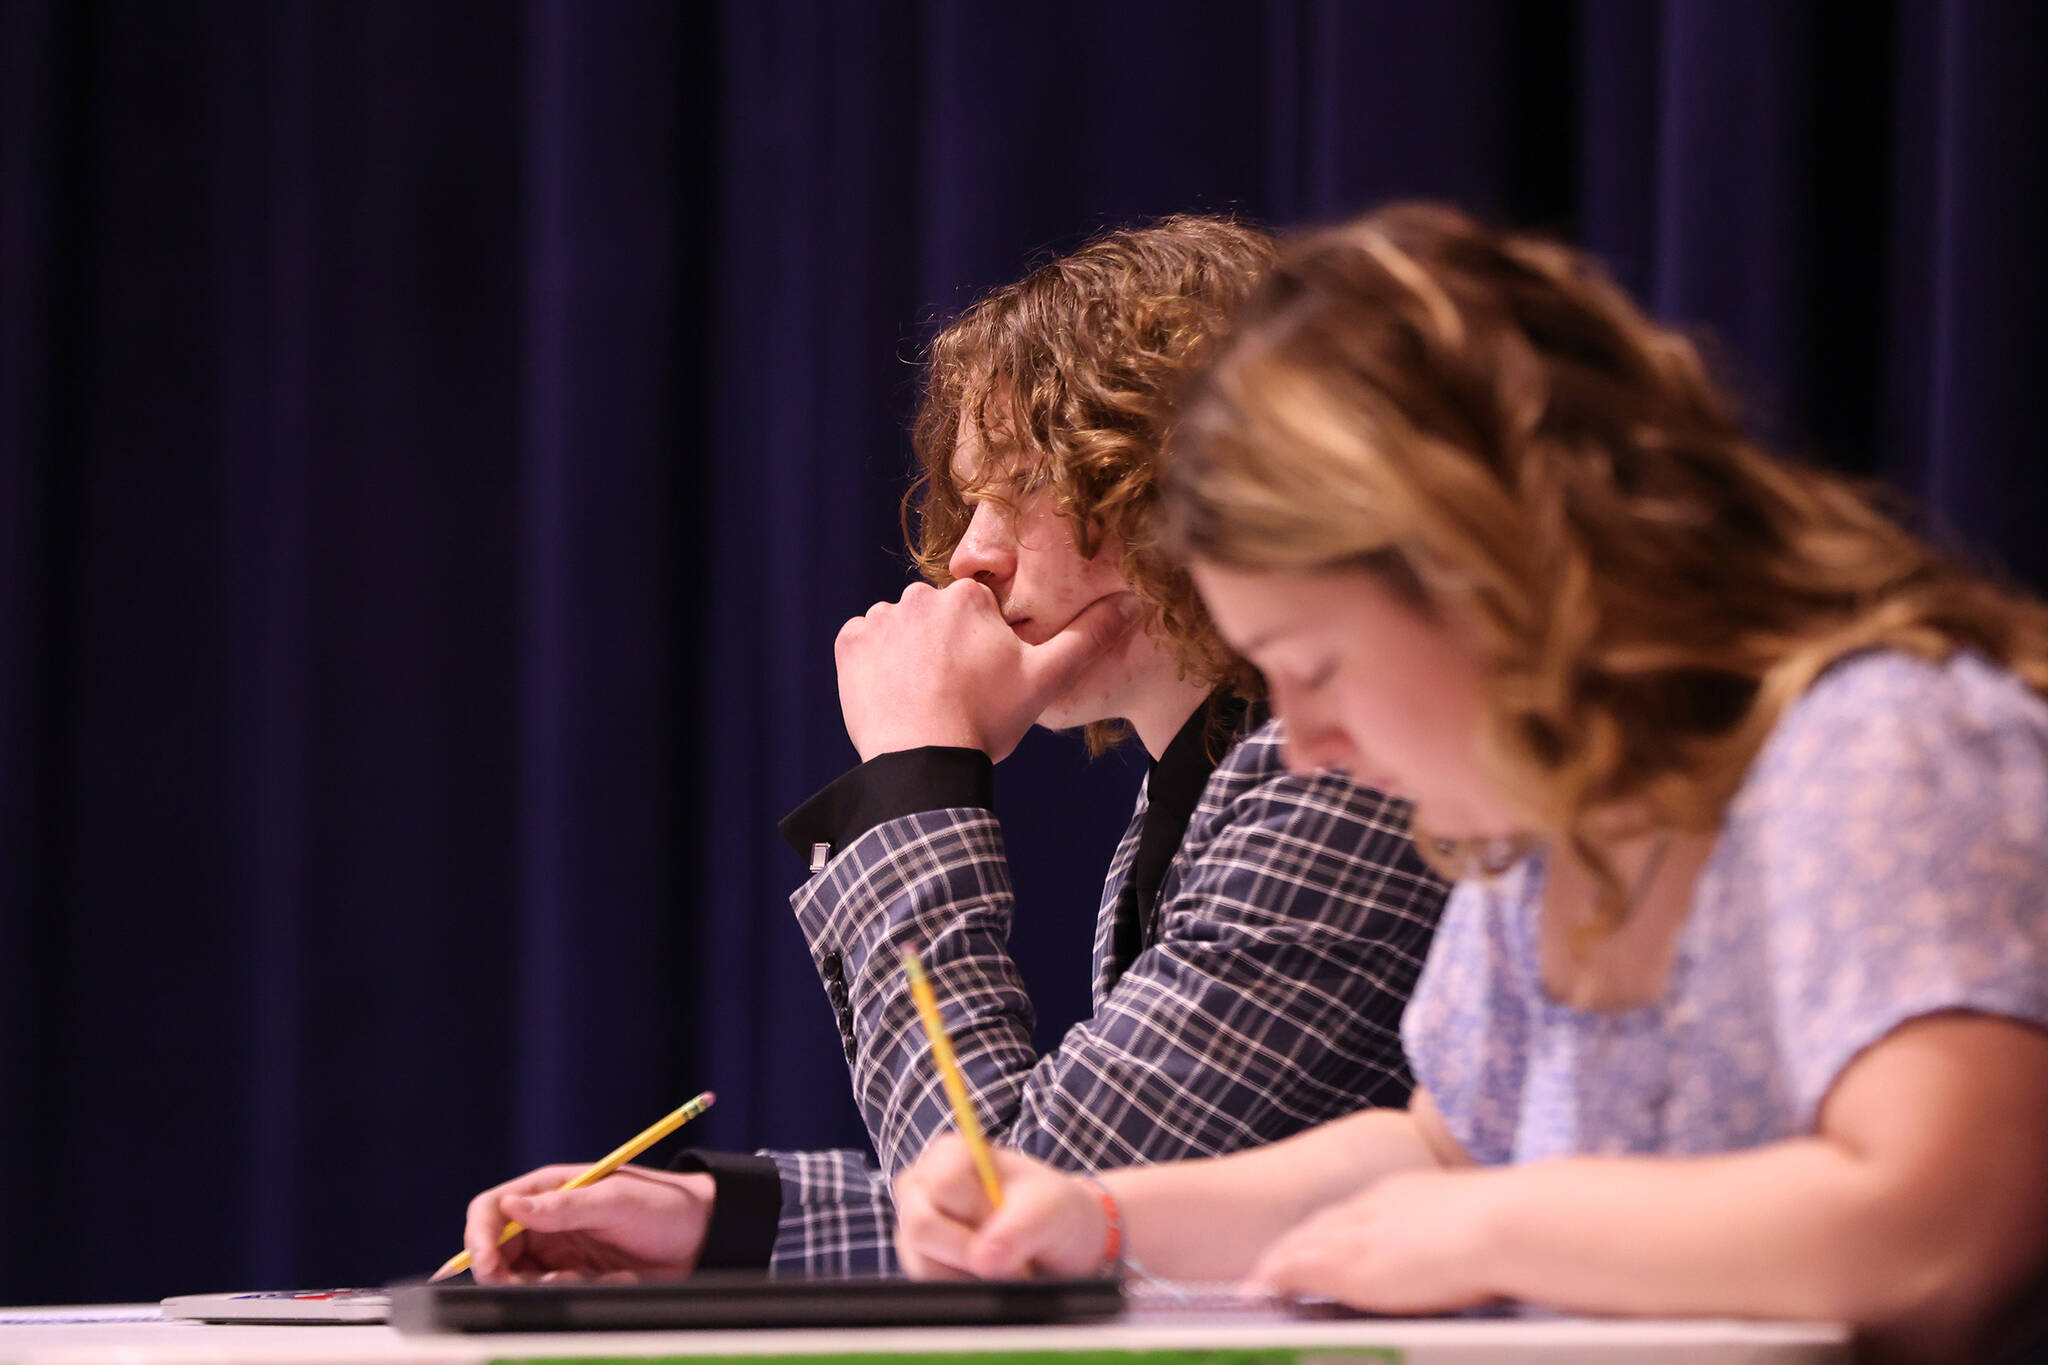 Killian Connolly and Kate Thomas of Ketchikan, who ultimately prevailed, take notes during the final debate at the Region V Drama, Debate and Forensics Tournament. (Ben Hohenstatt / Juneau Empire)